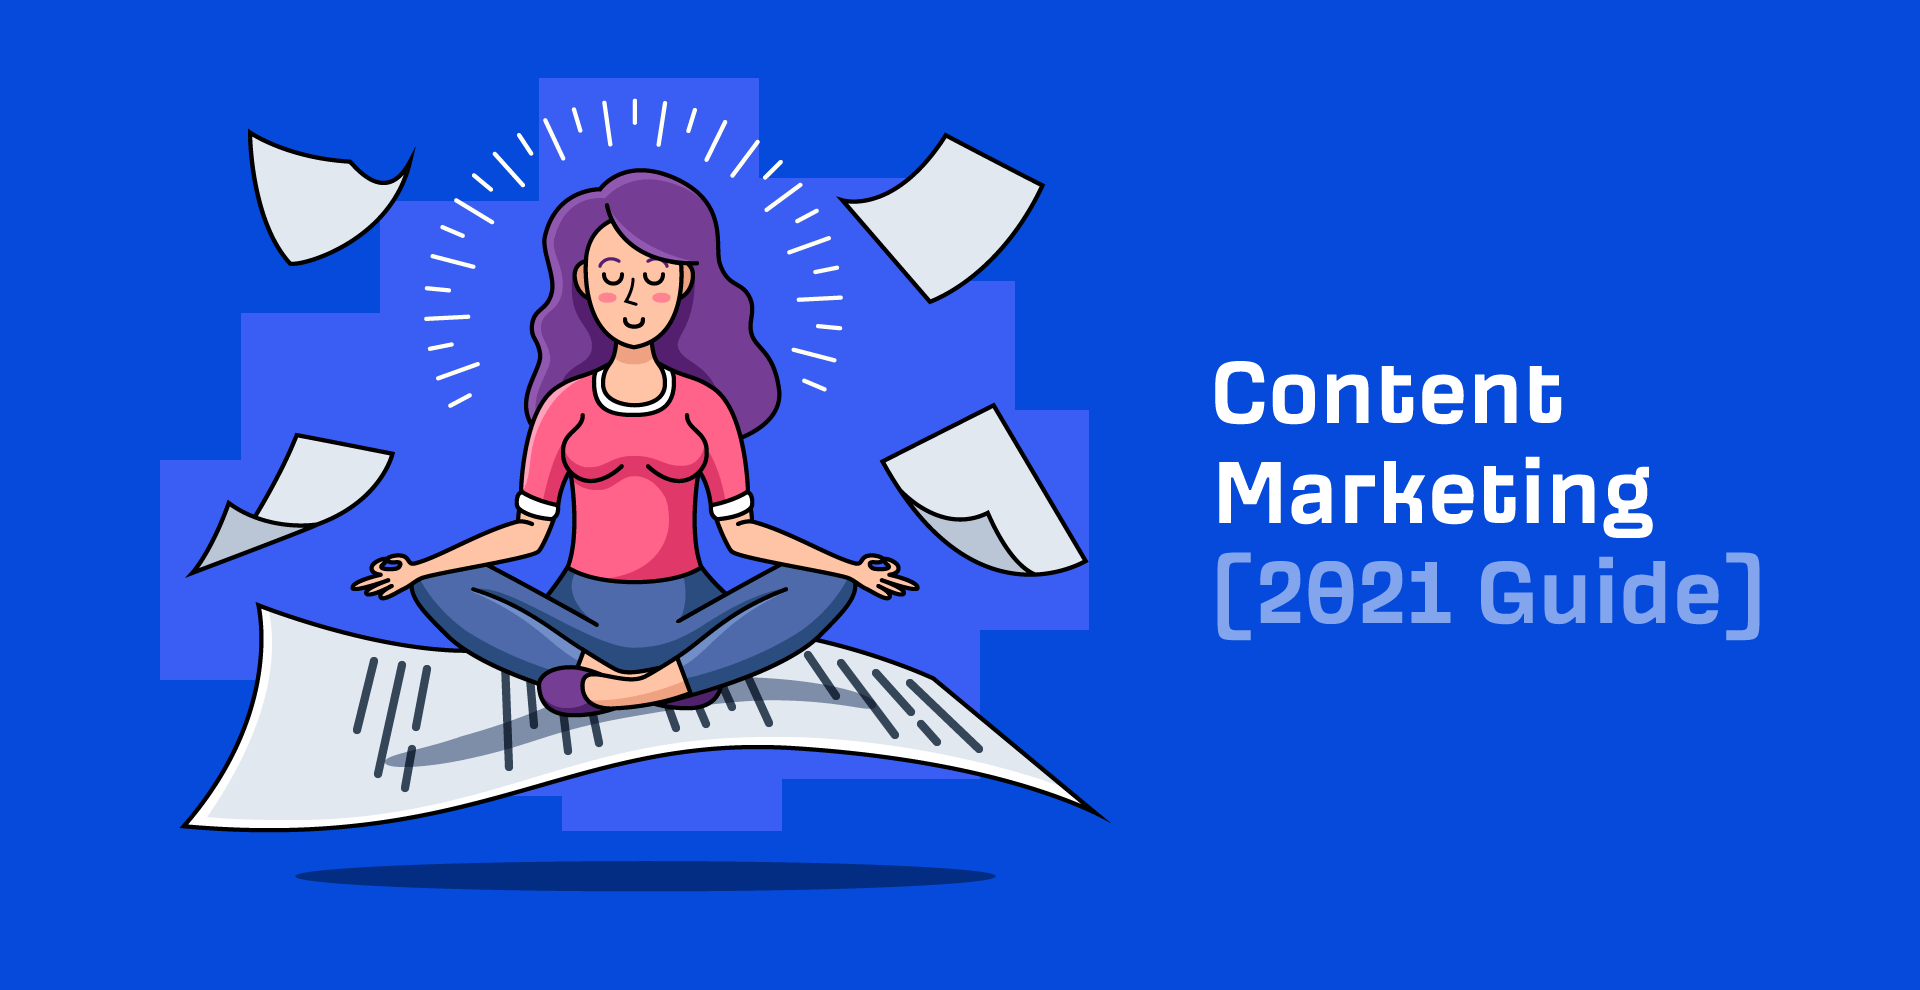 Content Marketing: A Comprehensive Guide For 2021